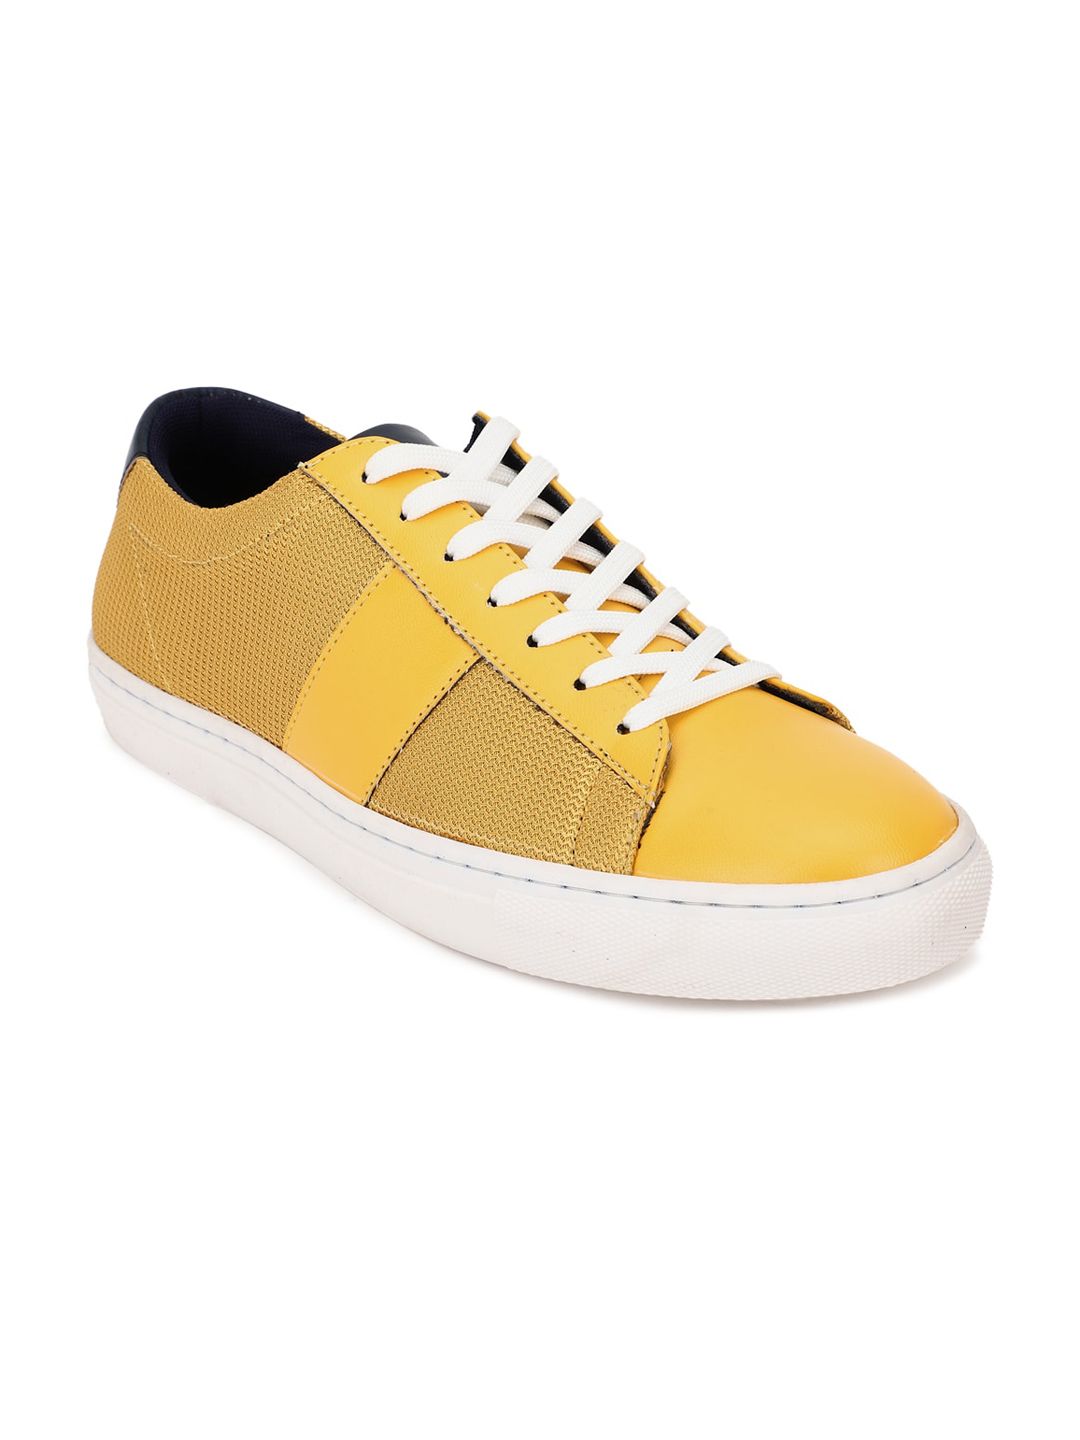 FOREVER 21 Women Yellow Textured Sneakers Price in India